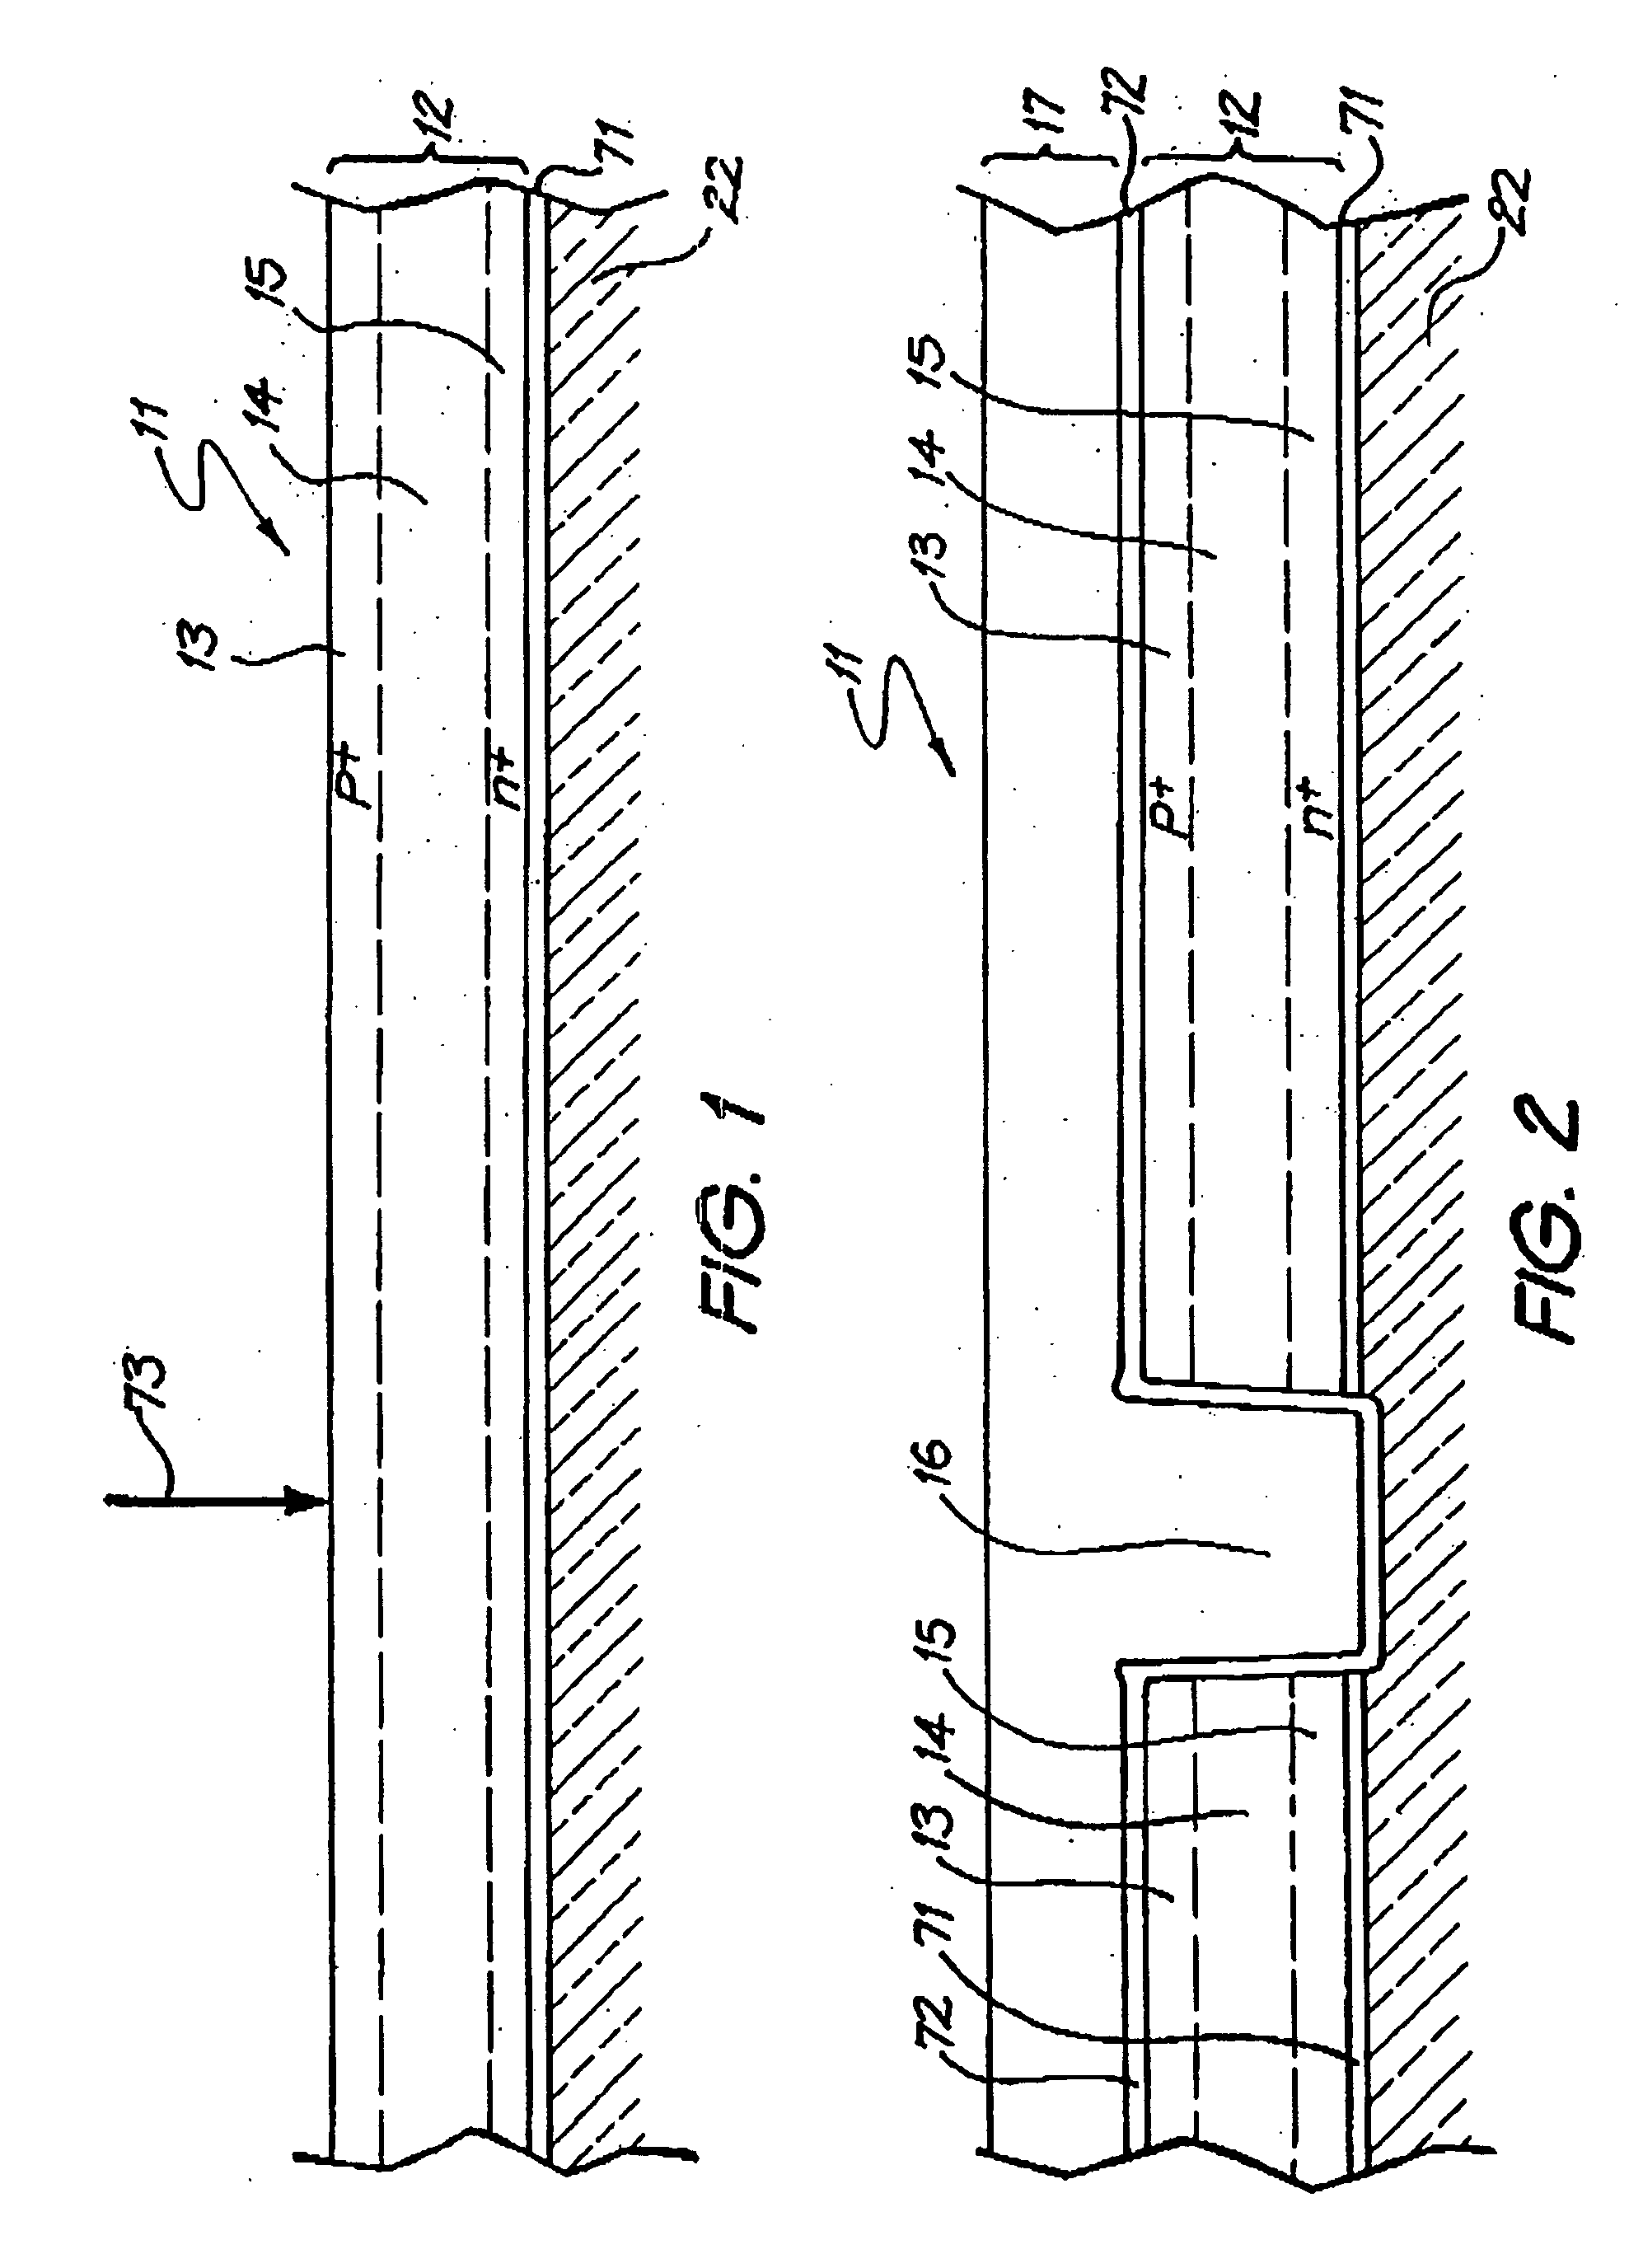 Method of etching silicon